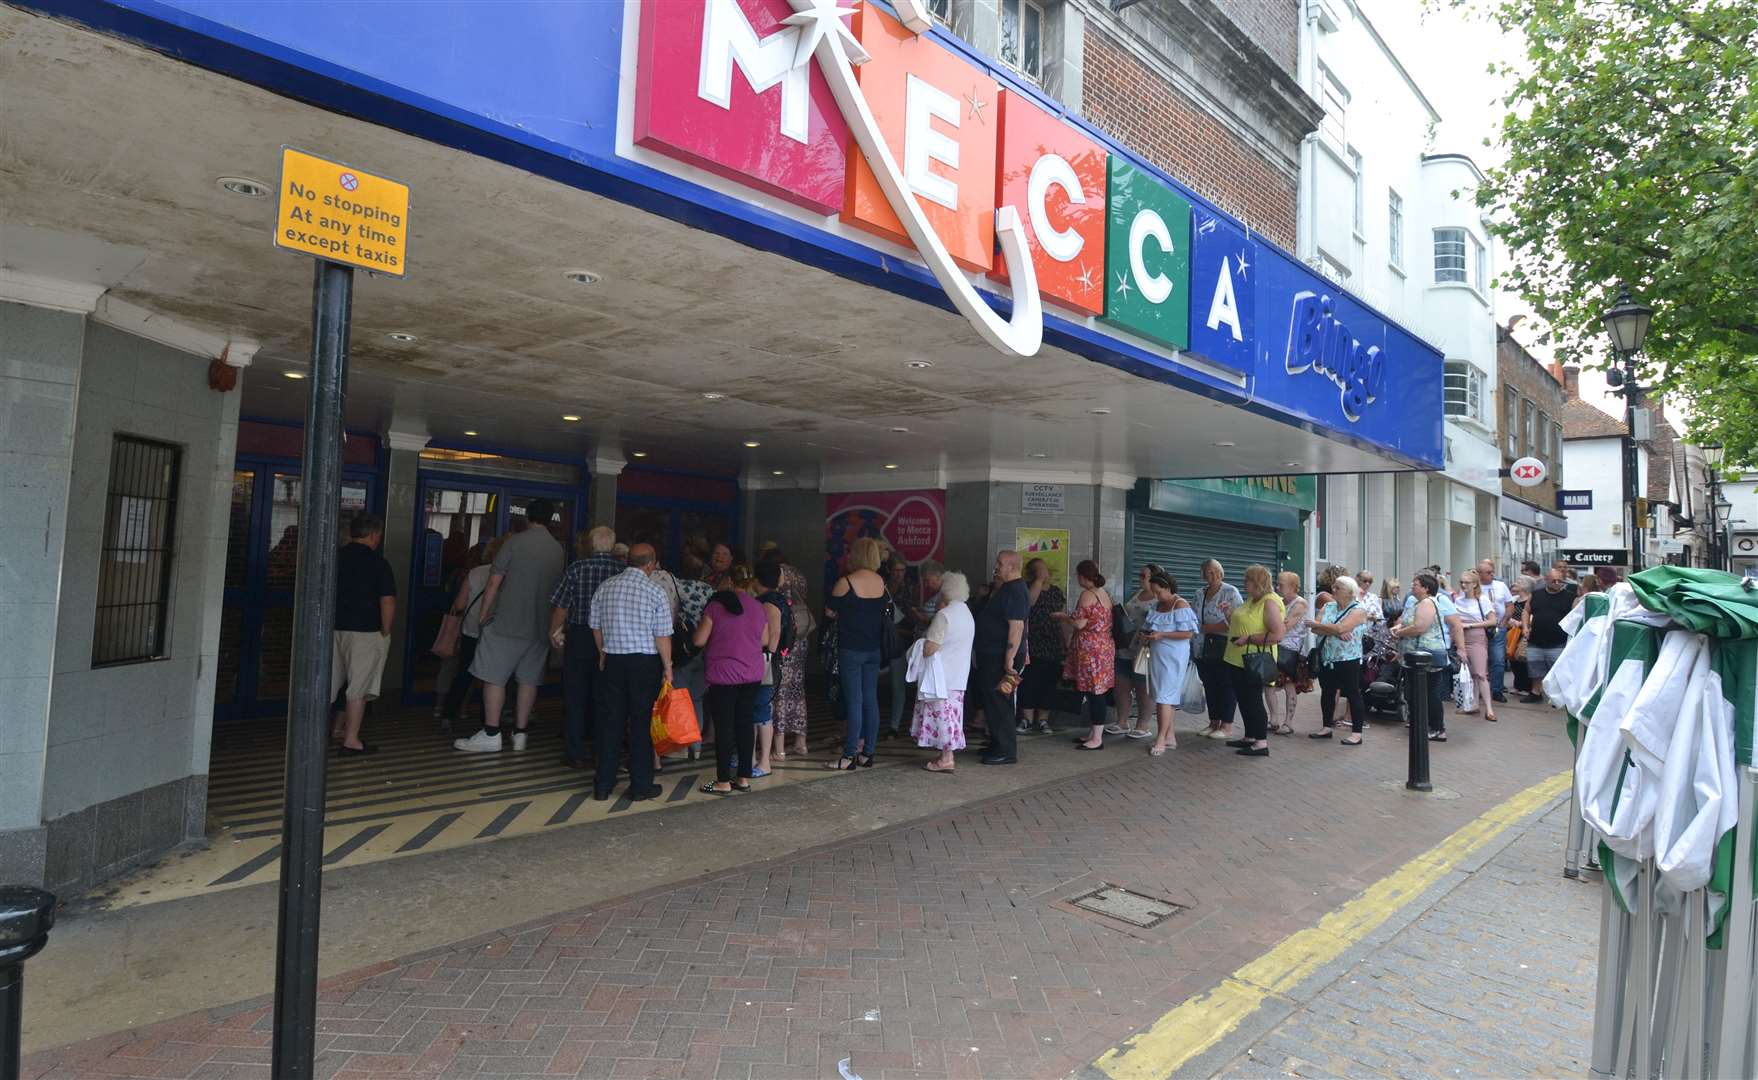 Crowds at Mecca Bingo in July 2018 before the site closed for good. Picture: Steve Salter